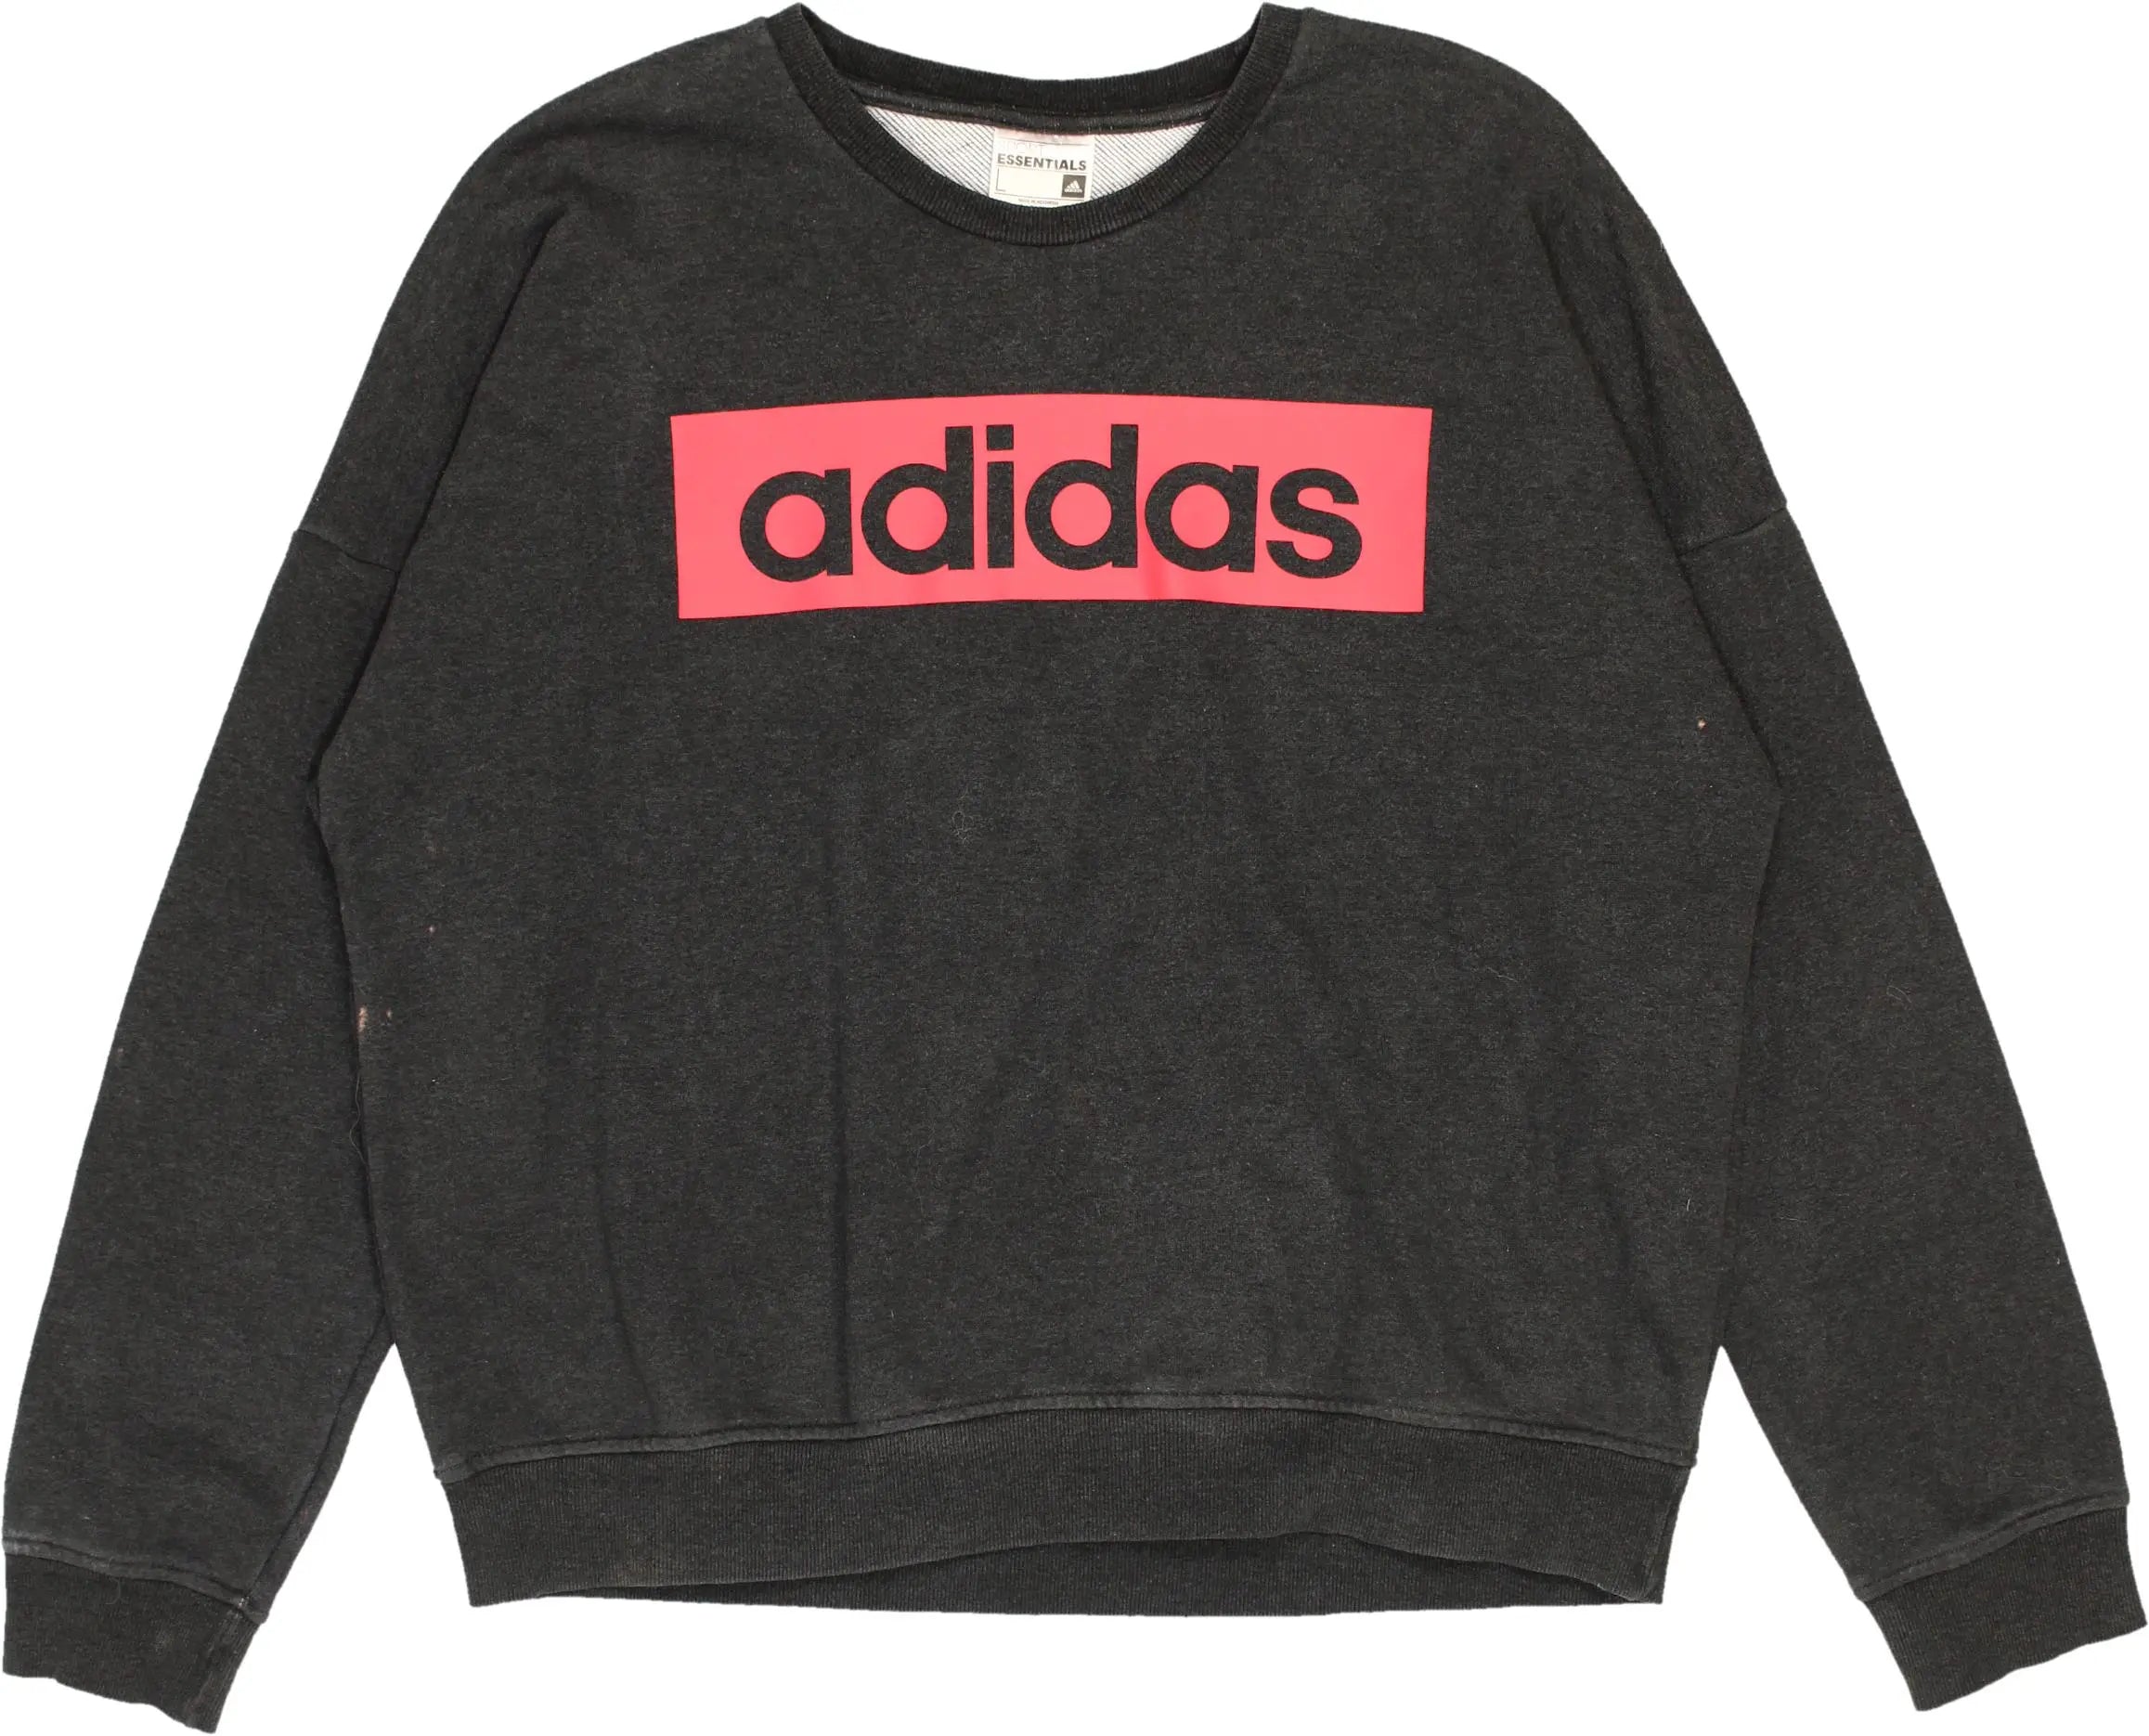 Adidas - Grey Sweater by Adidas- ThriftTale.com - Vintage and second handclothing